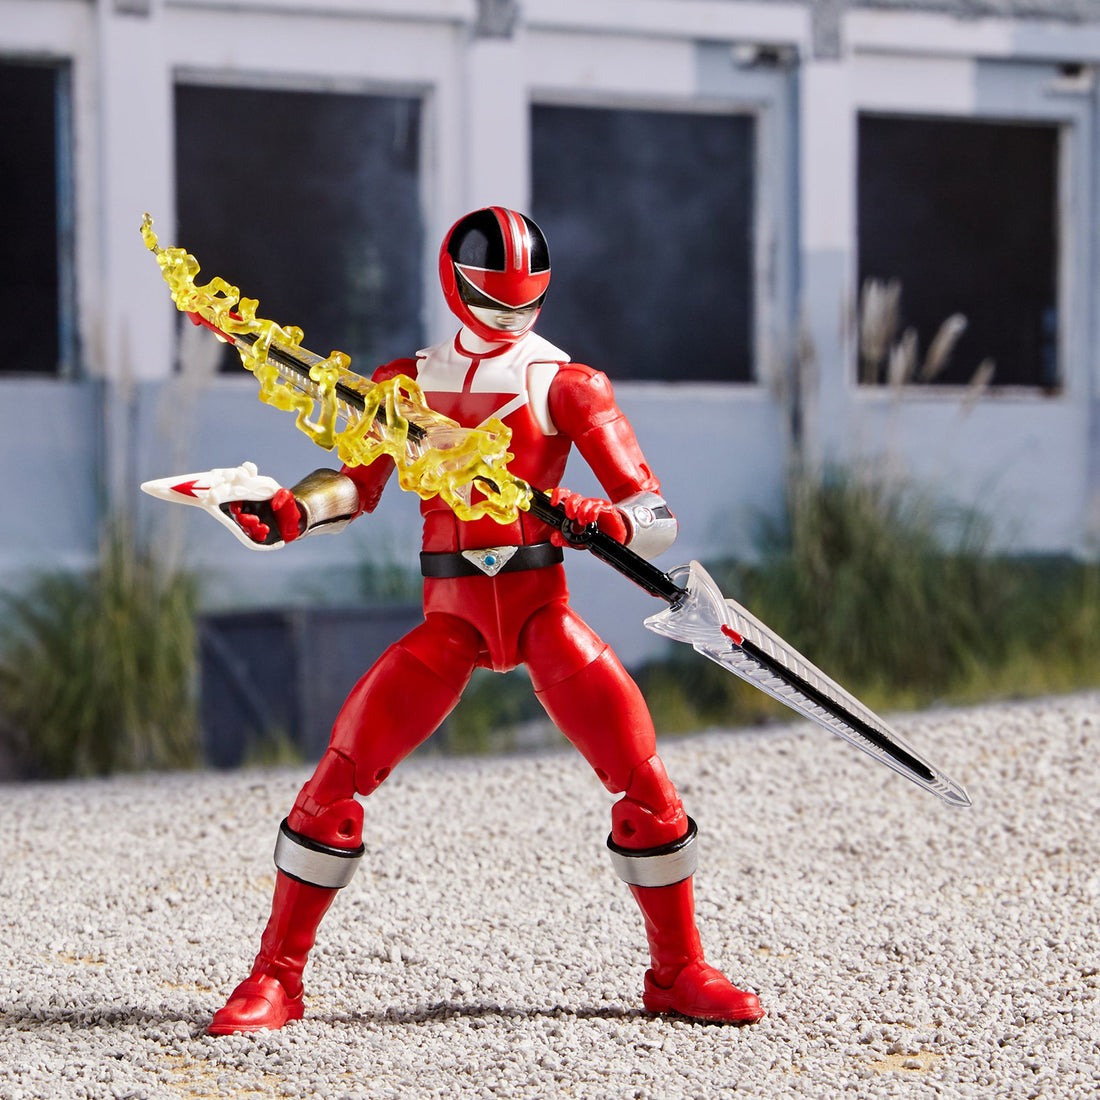 Power Rangers Lightning Collection Time Force Red Ranger Figure